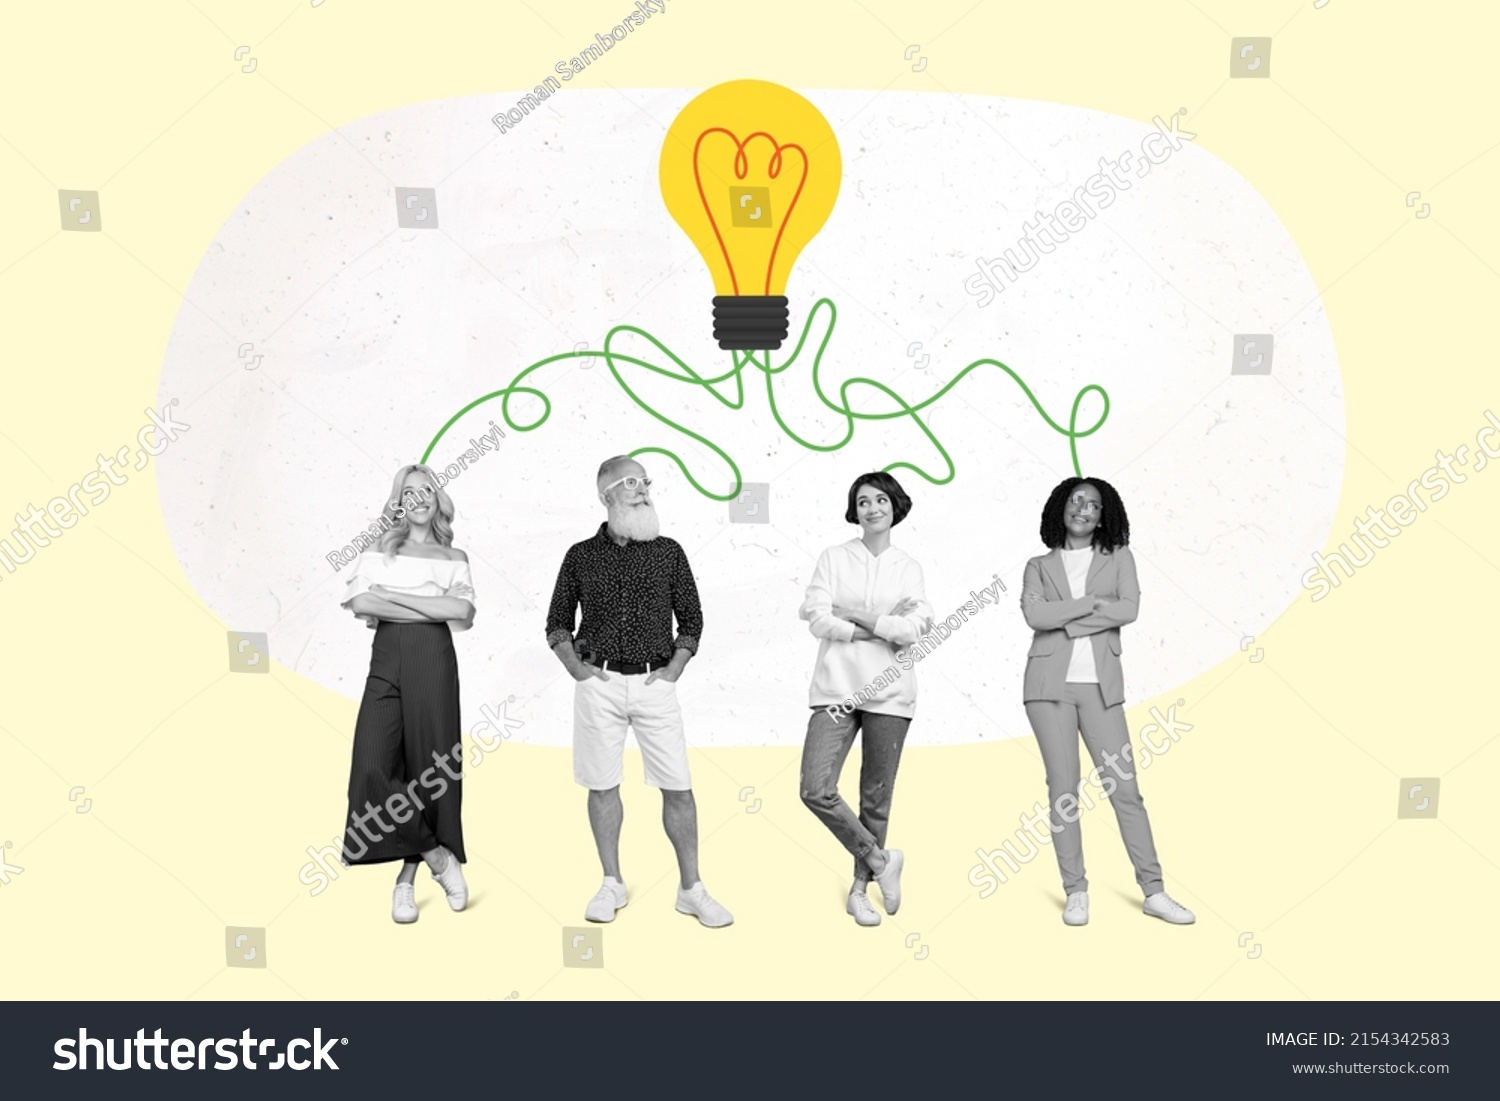 Retro artwork of black white filter people colleagues suggestions connected cartoon light bulb isolated colorful background #2154342583